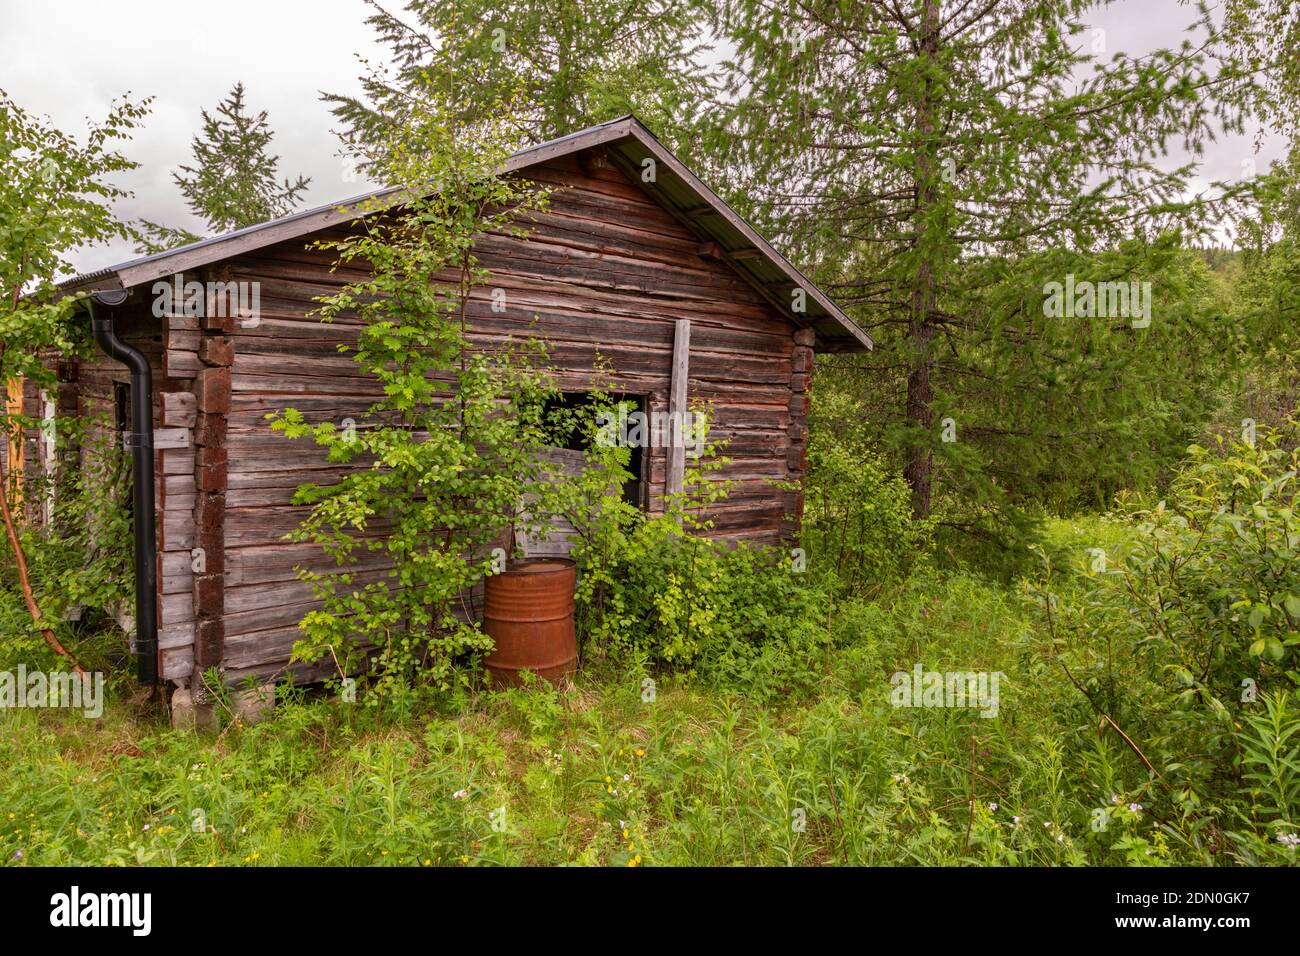 Old barn with an oil drum outside and larch trees around, Norrbotten province, Sweden Stock Photo